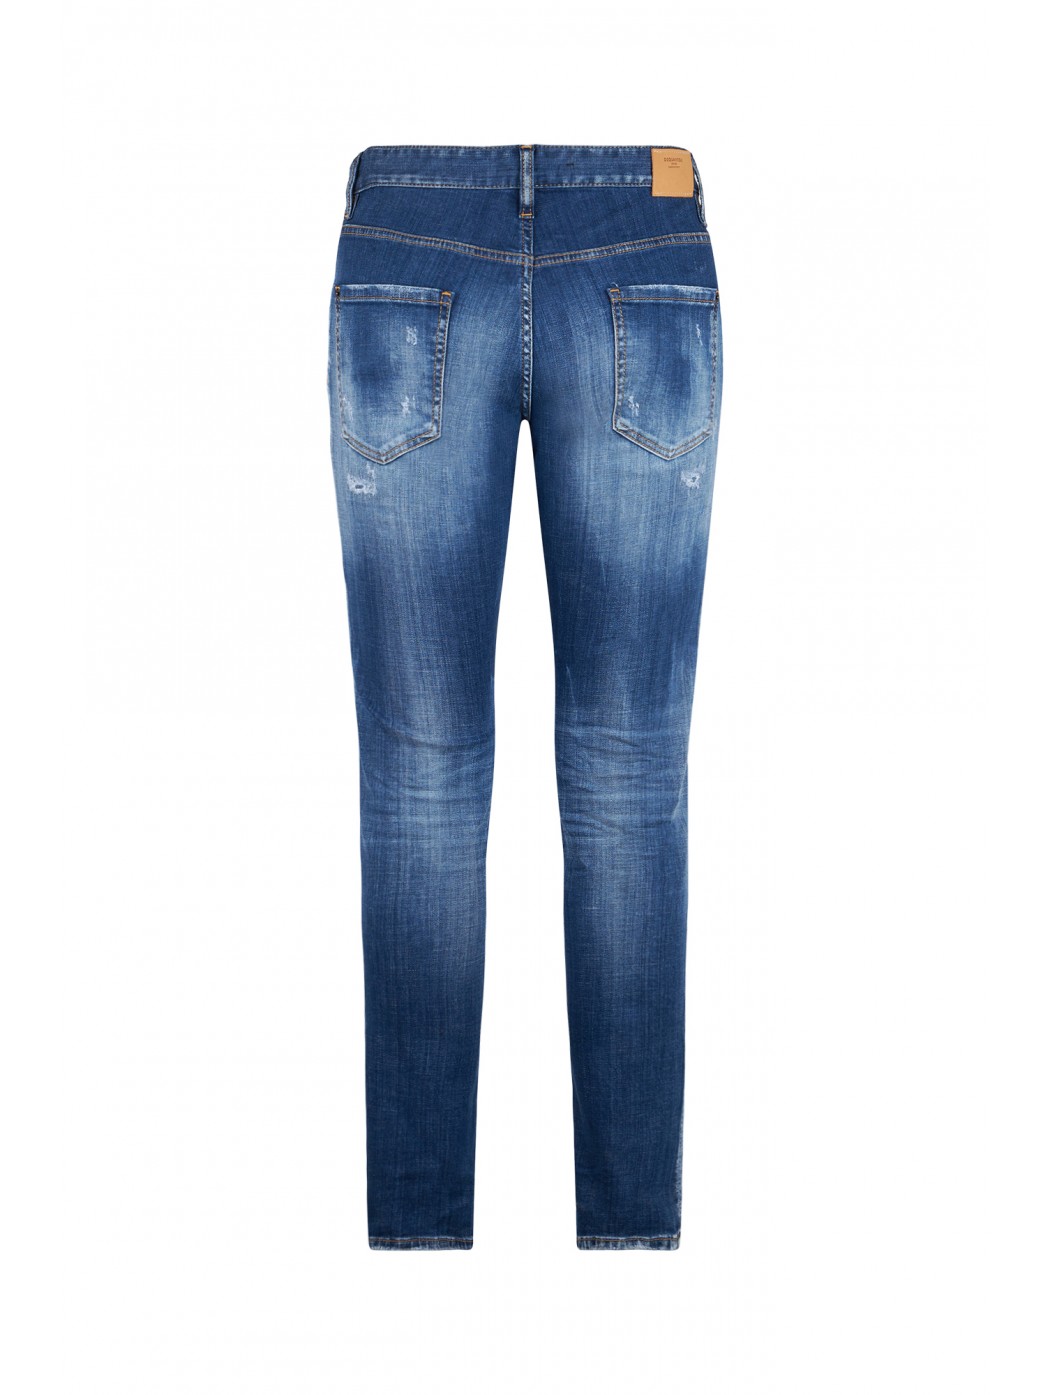 COOL GUY JEAN DSQUARED2 S74LB1266S30342 470